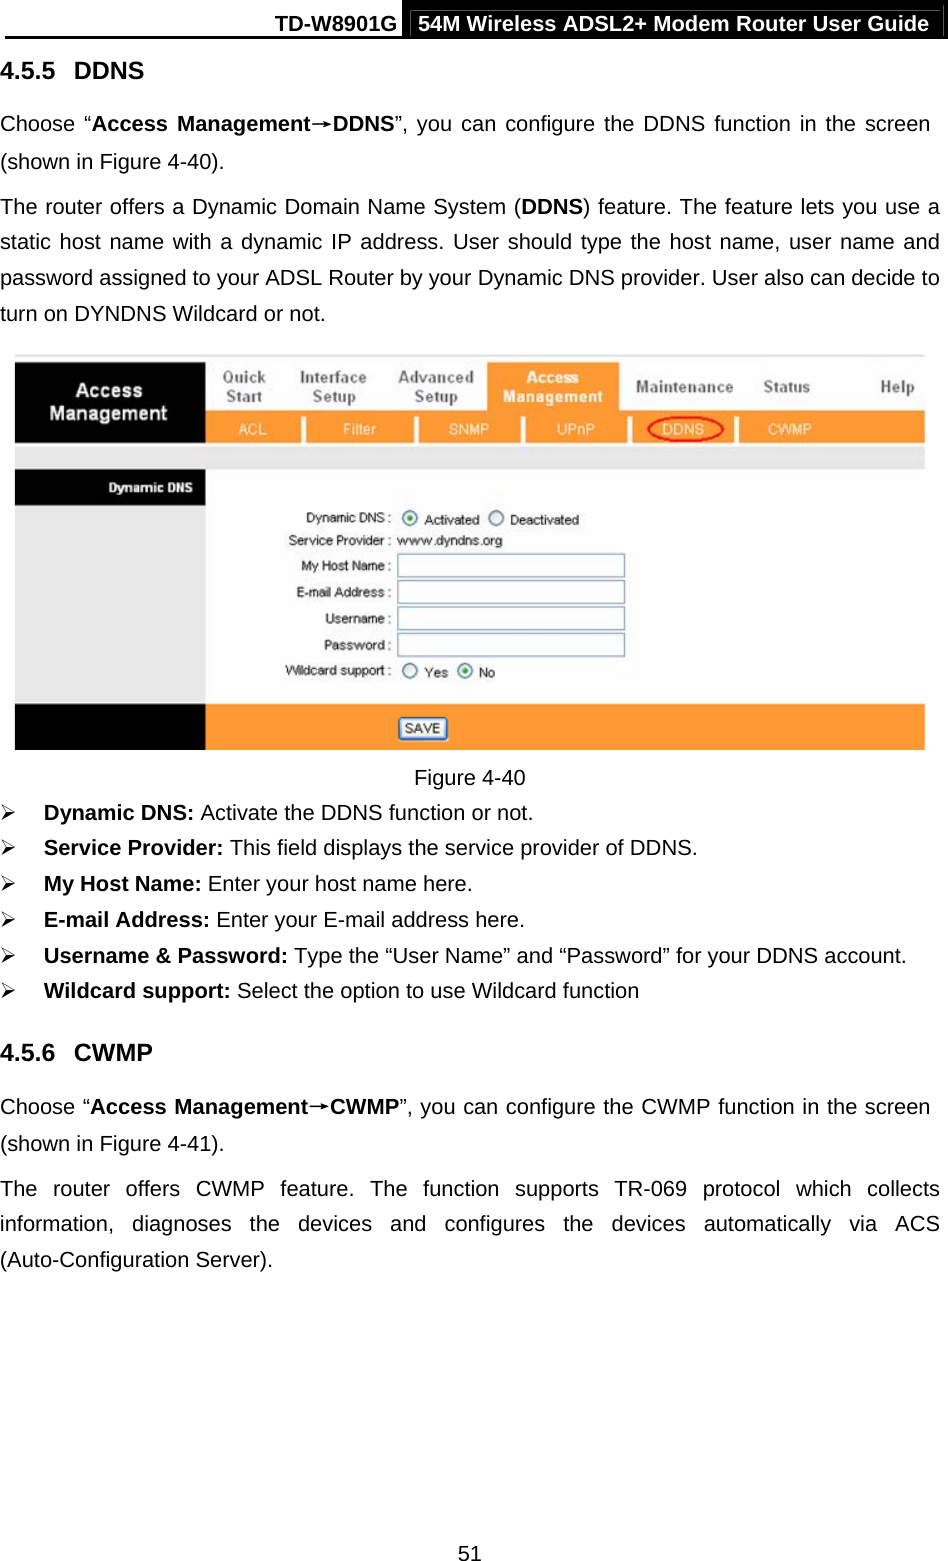 TD-W8901G 54M Wireless ADSL2+ Modem Router User Guide  514.5.5  DDNS Choose “Access Management→DDNS”, you can configure the DDNS function in the screen (shown in Figure 4-40). The router offers a Dynamic Domain Name System (DDNS) feature. The feature lets you use a static host name with a dynamic IP address. User should type the host name, user name and password assigned to your ADSL Router by your Dynamic DNS provider. User also can decide to turn on DYNDNS Wildcard or not.  Figure 4-40 ¾ Dynamic DNS: Activate the DDNS function or not. ¾ Service Provider: This field displays the service provider of DDNS. ¾ My Host Name: Enter your host name here. ¾ E-mail Address: Enter your E-mail address here. ¾ Username &amp; Password: Type the “User Name” and “Password” for your DDNS account. ¾ Wildcard support: Select the option to use Wildcard function 4.5.6  CWMP Choose “Access Management→CWMP”, you can configure the CWMP function in the screen (shown in Figure 4-41). The router offers CWMP feature. The function supports TR-069 protocol which collects information, diagnoses the devices and configures the devices automatically via ACS (Auto-Configuration Server). 